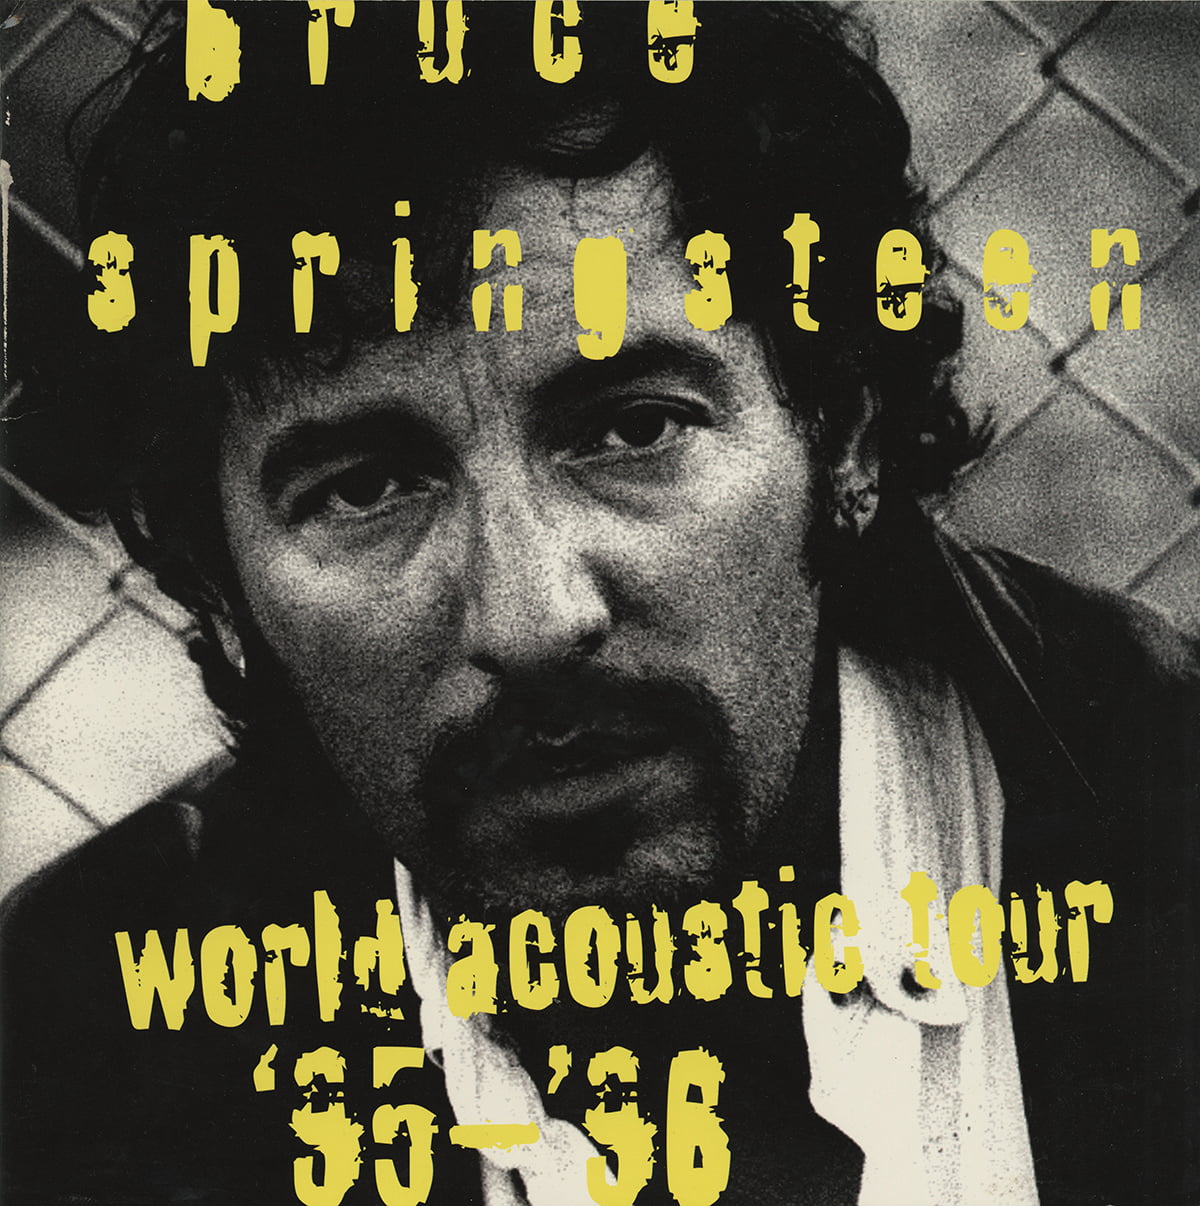 Bruce Springsteen Ghost of Tom Joad Tour book